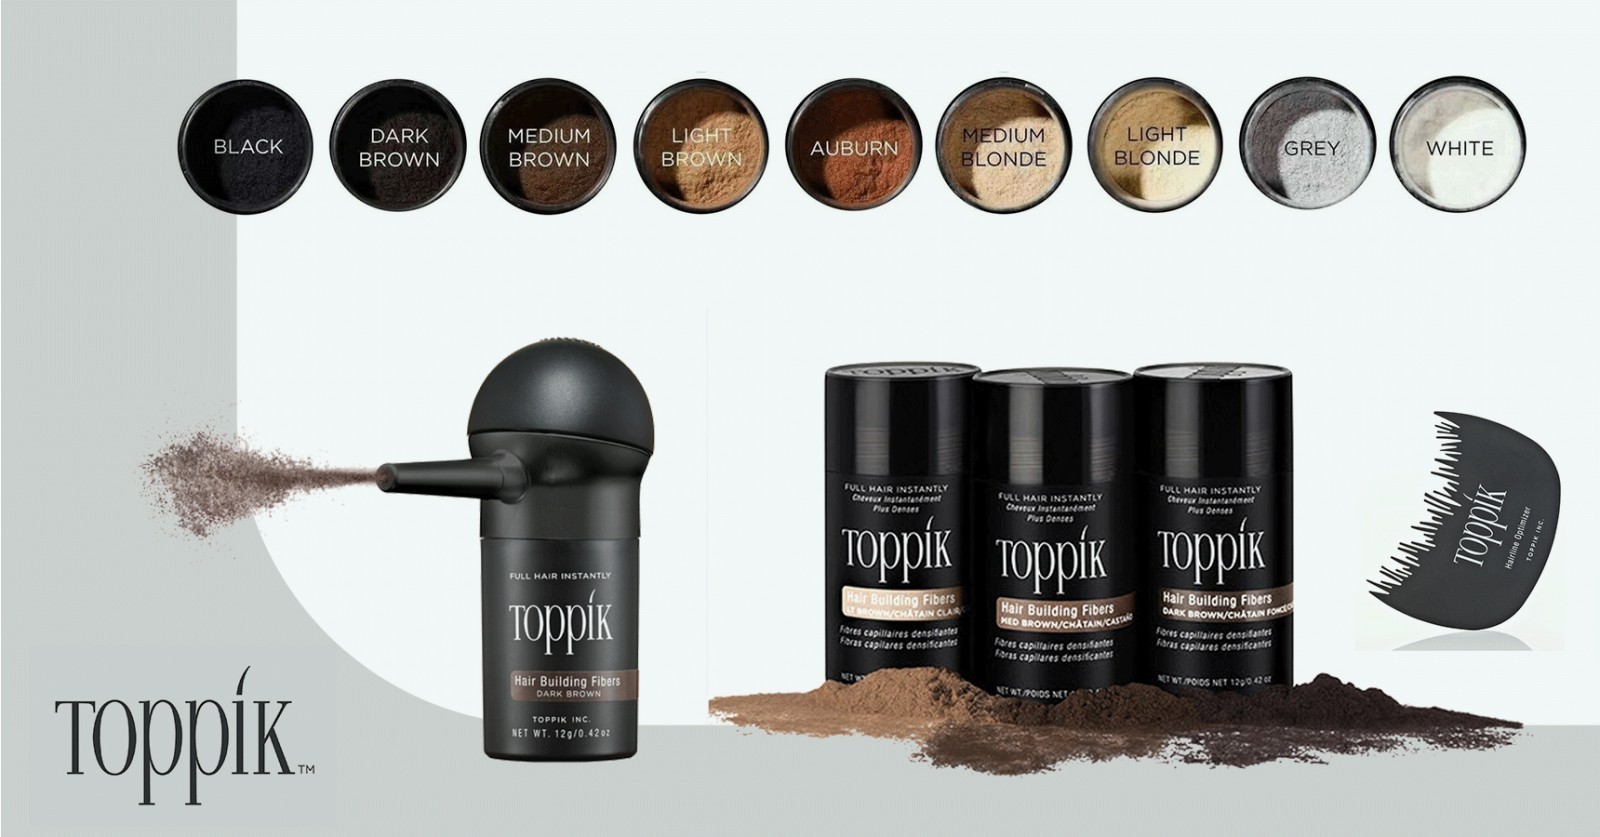 Toppik Hair Fibers is a cosmetic solution to cover thin, thinning, or fine hair. Toppik  is durable, stays in place all day from shampoo to shampoo.